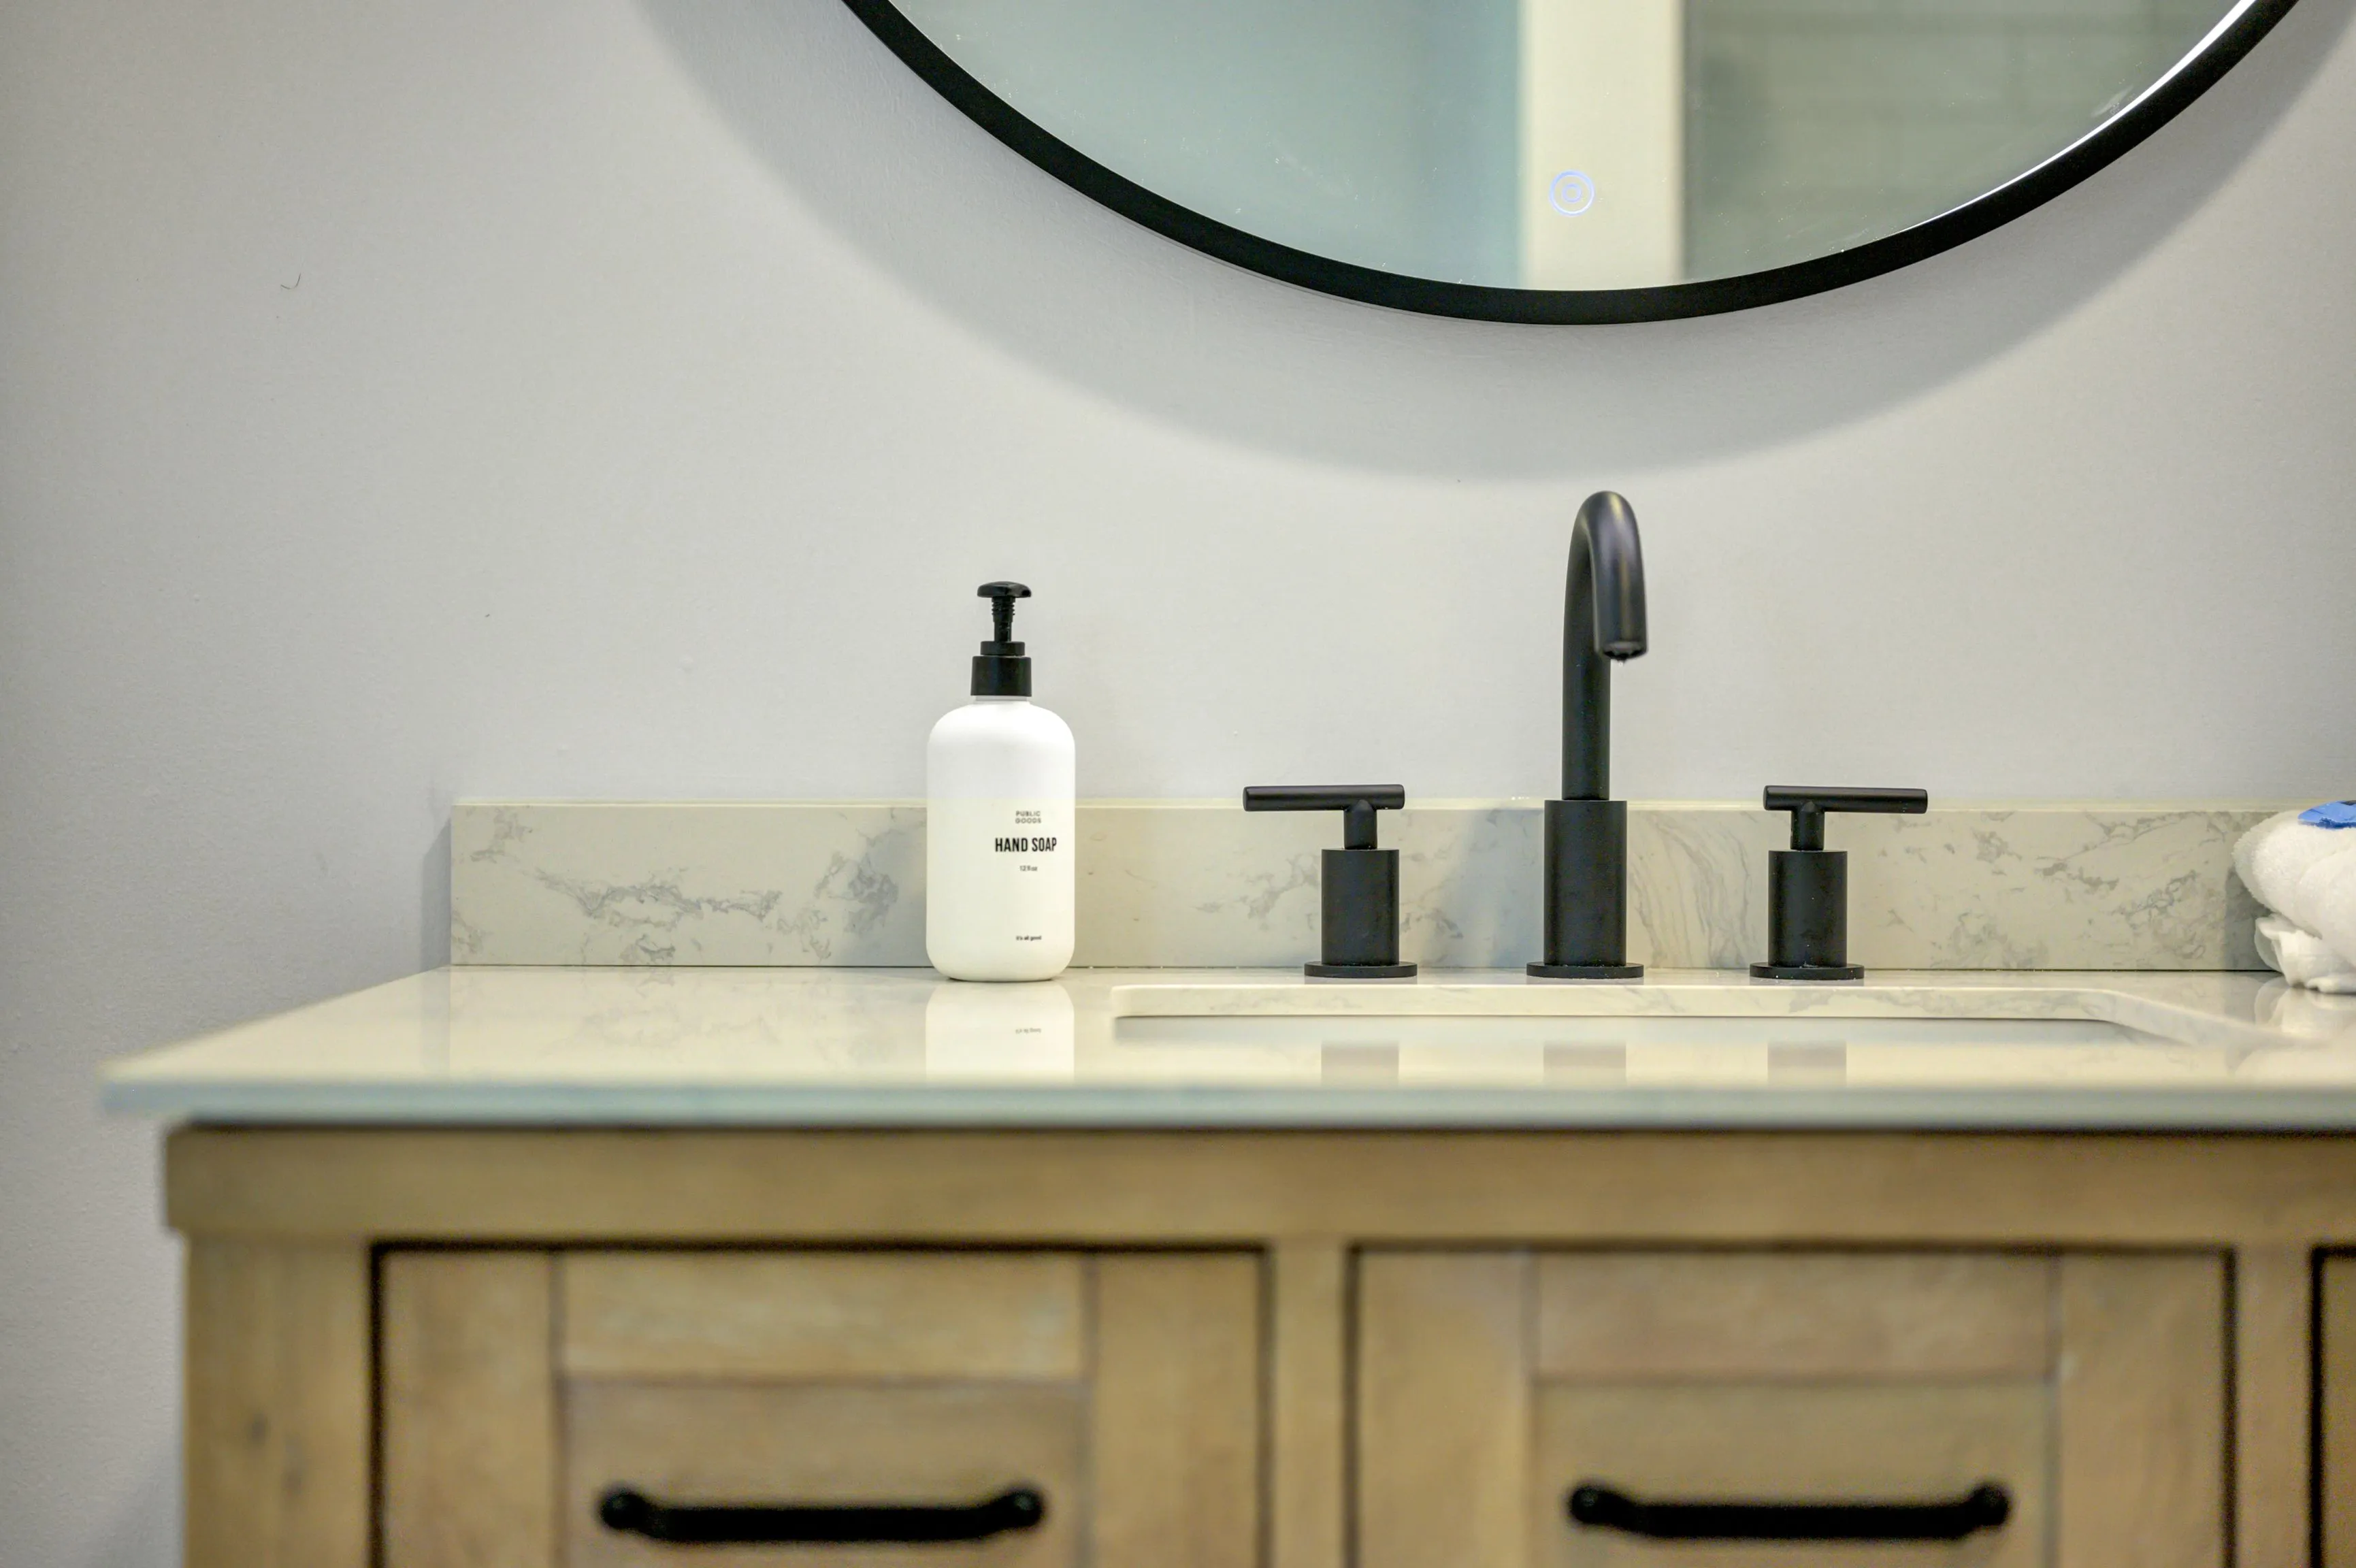 Modern bathroom sink with marble countertop, black faucet, and hand soap dispenser, reflected in a round mirror on a light-coloured wall.